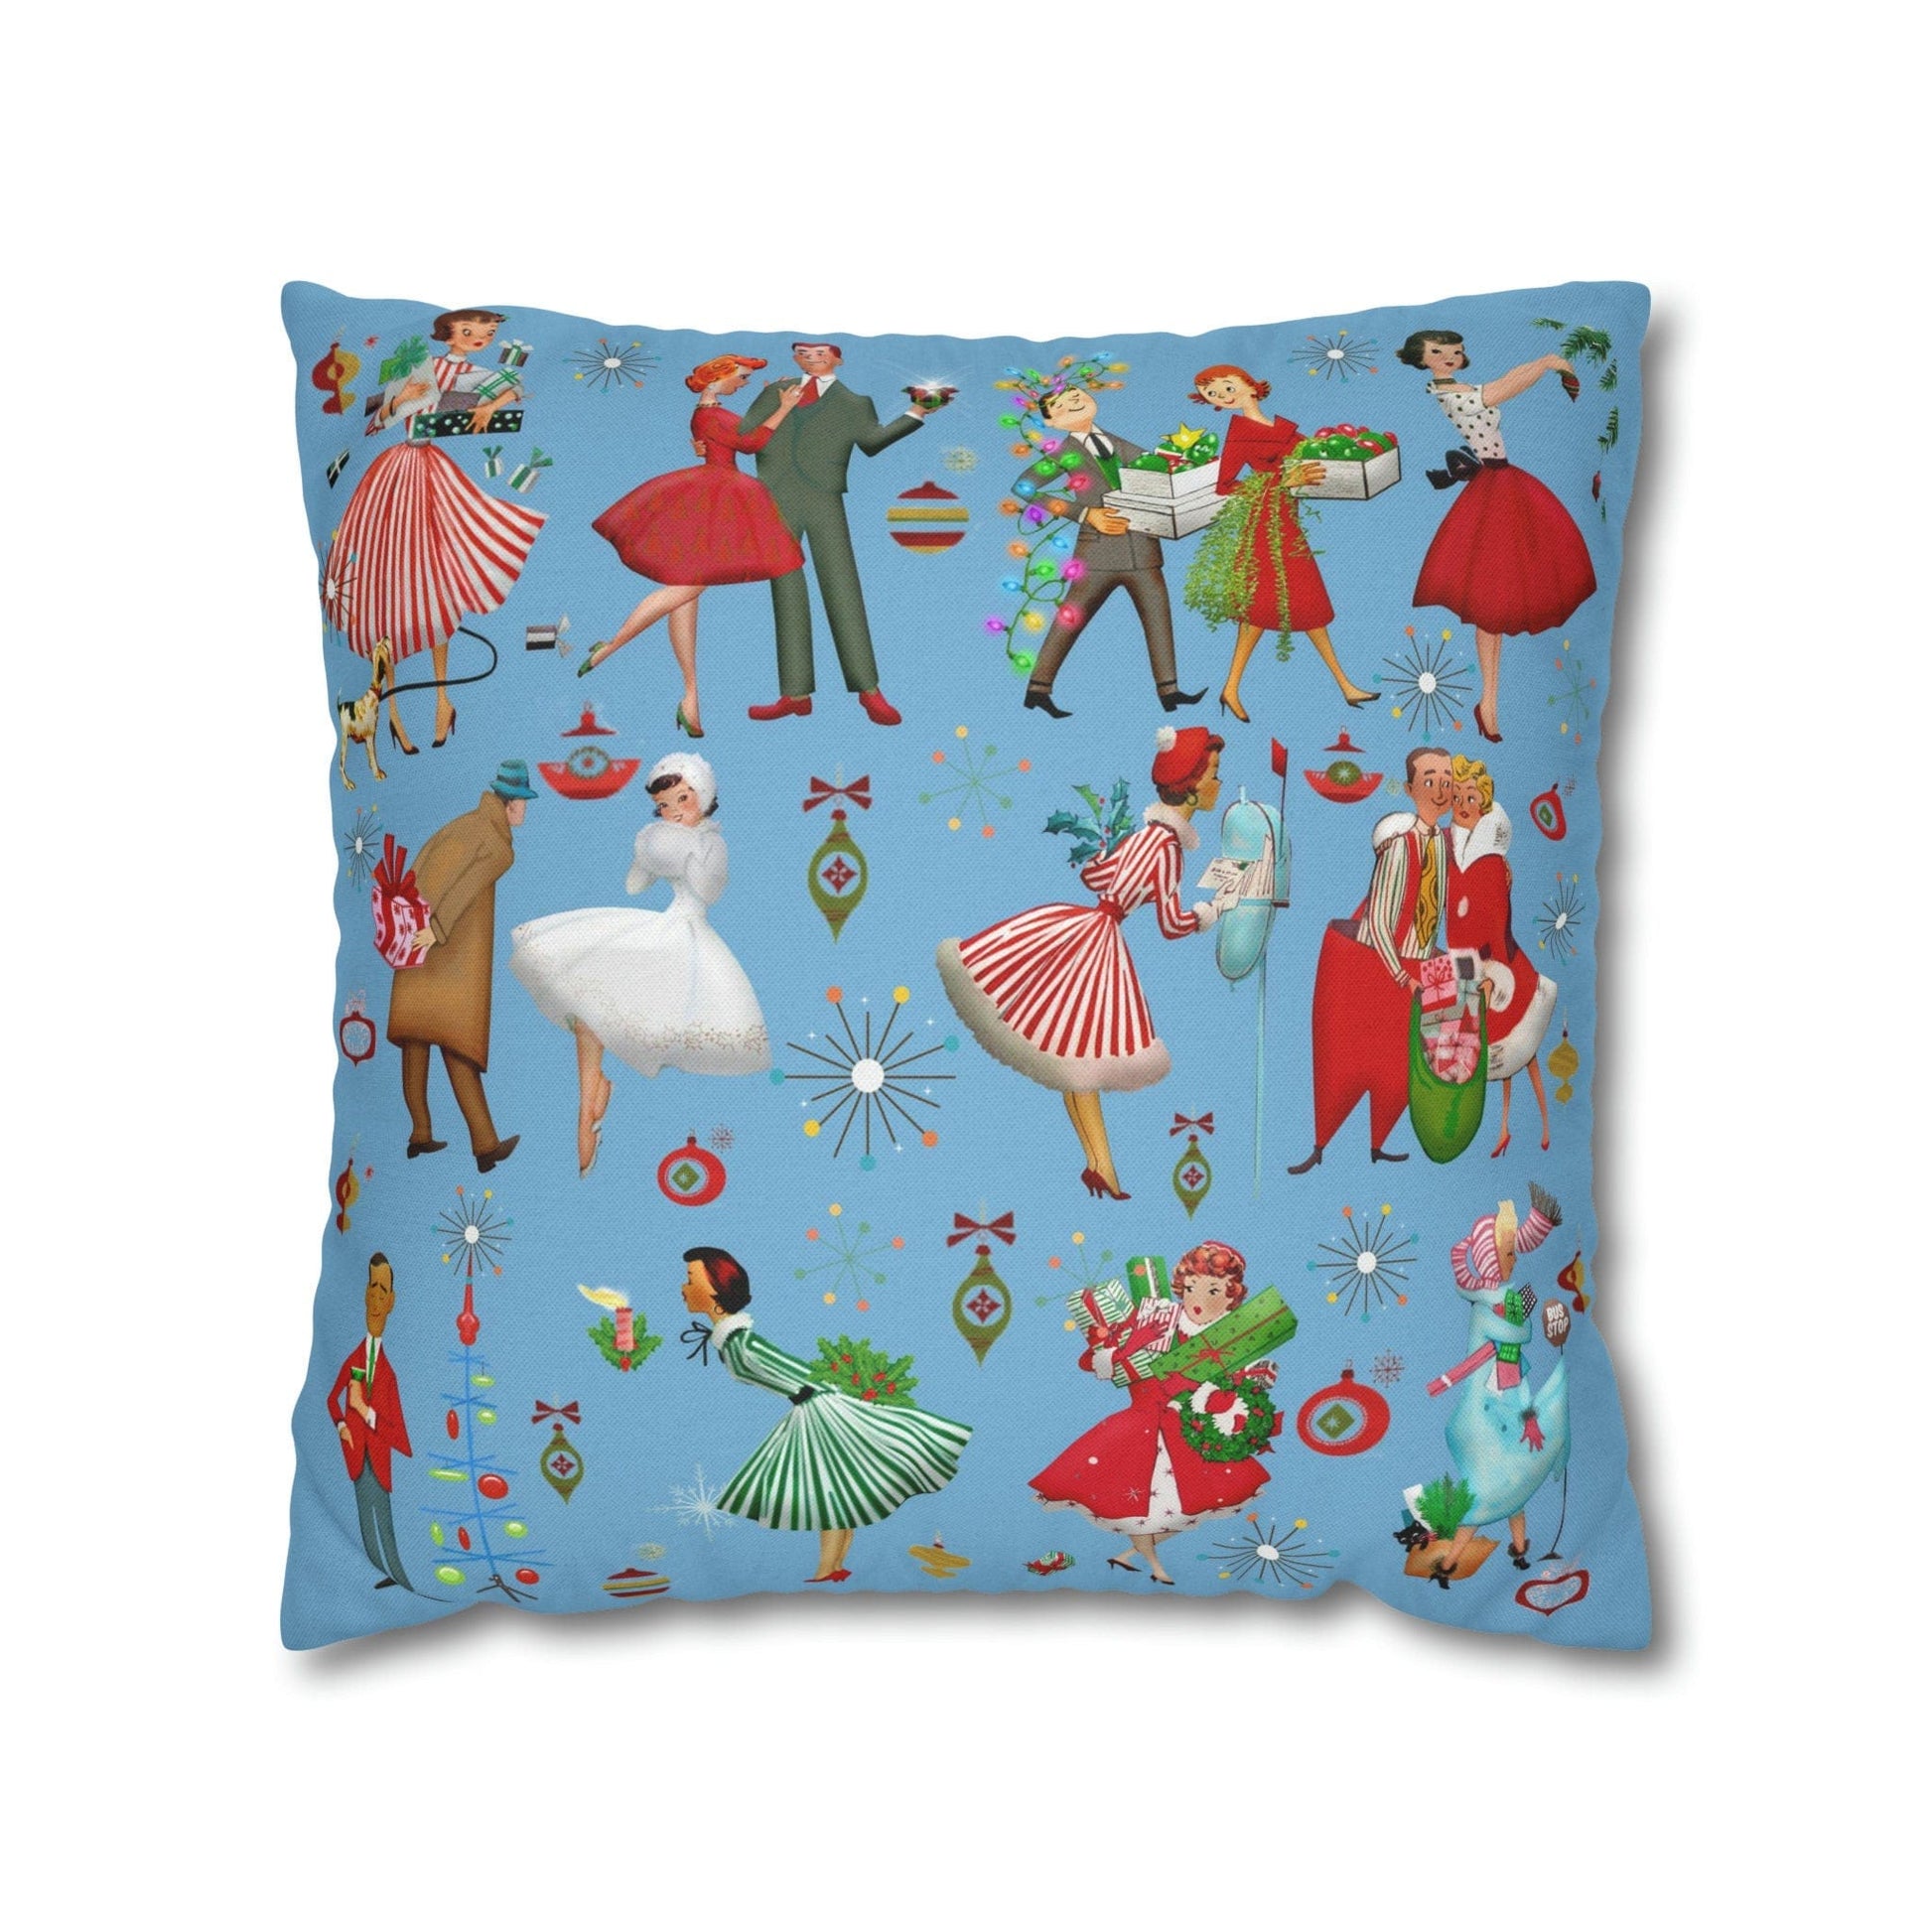 Kate McEnroe New York Retro Vintage 1950s Kitsch Christmas Throw Pillow Cover, Vintage Housewives, Couples Xmas Card Inspired Art, MCM Holiday Decor Throw Pillow Covers